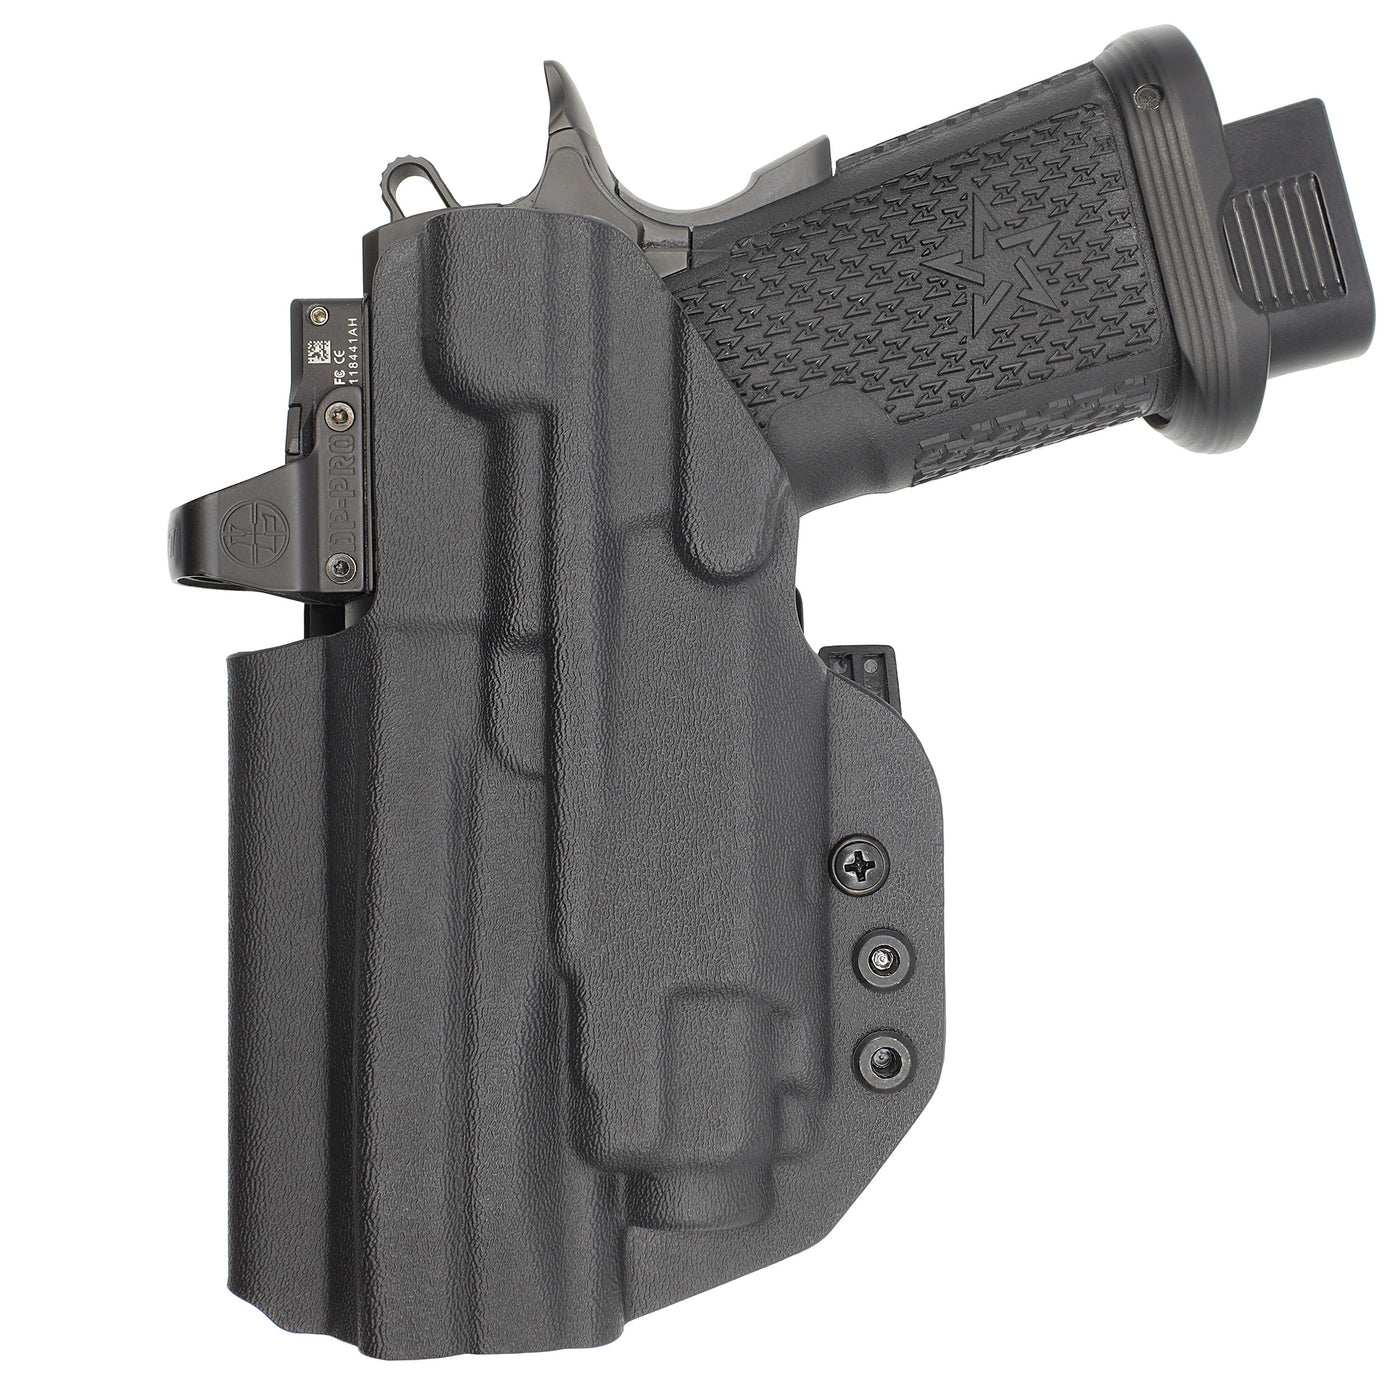 C&G Holsters custom IWB ALPHA UPGRADE Tactical 1911 streamlight TLR8 holstered back view